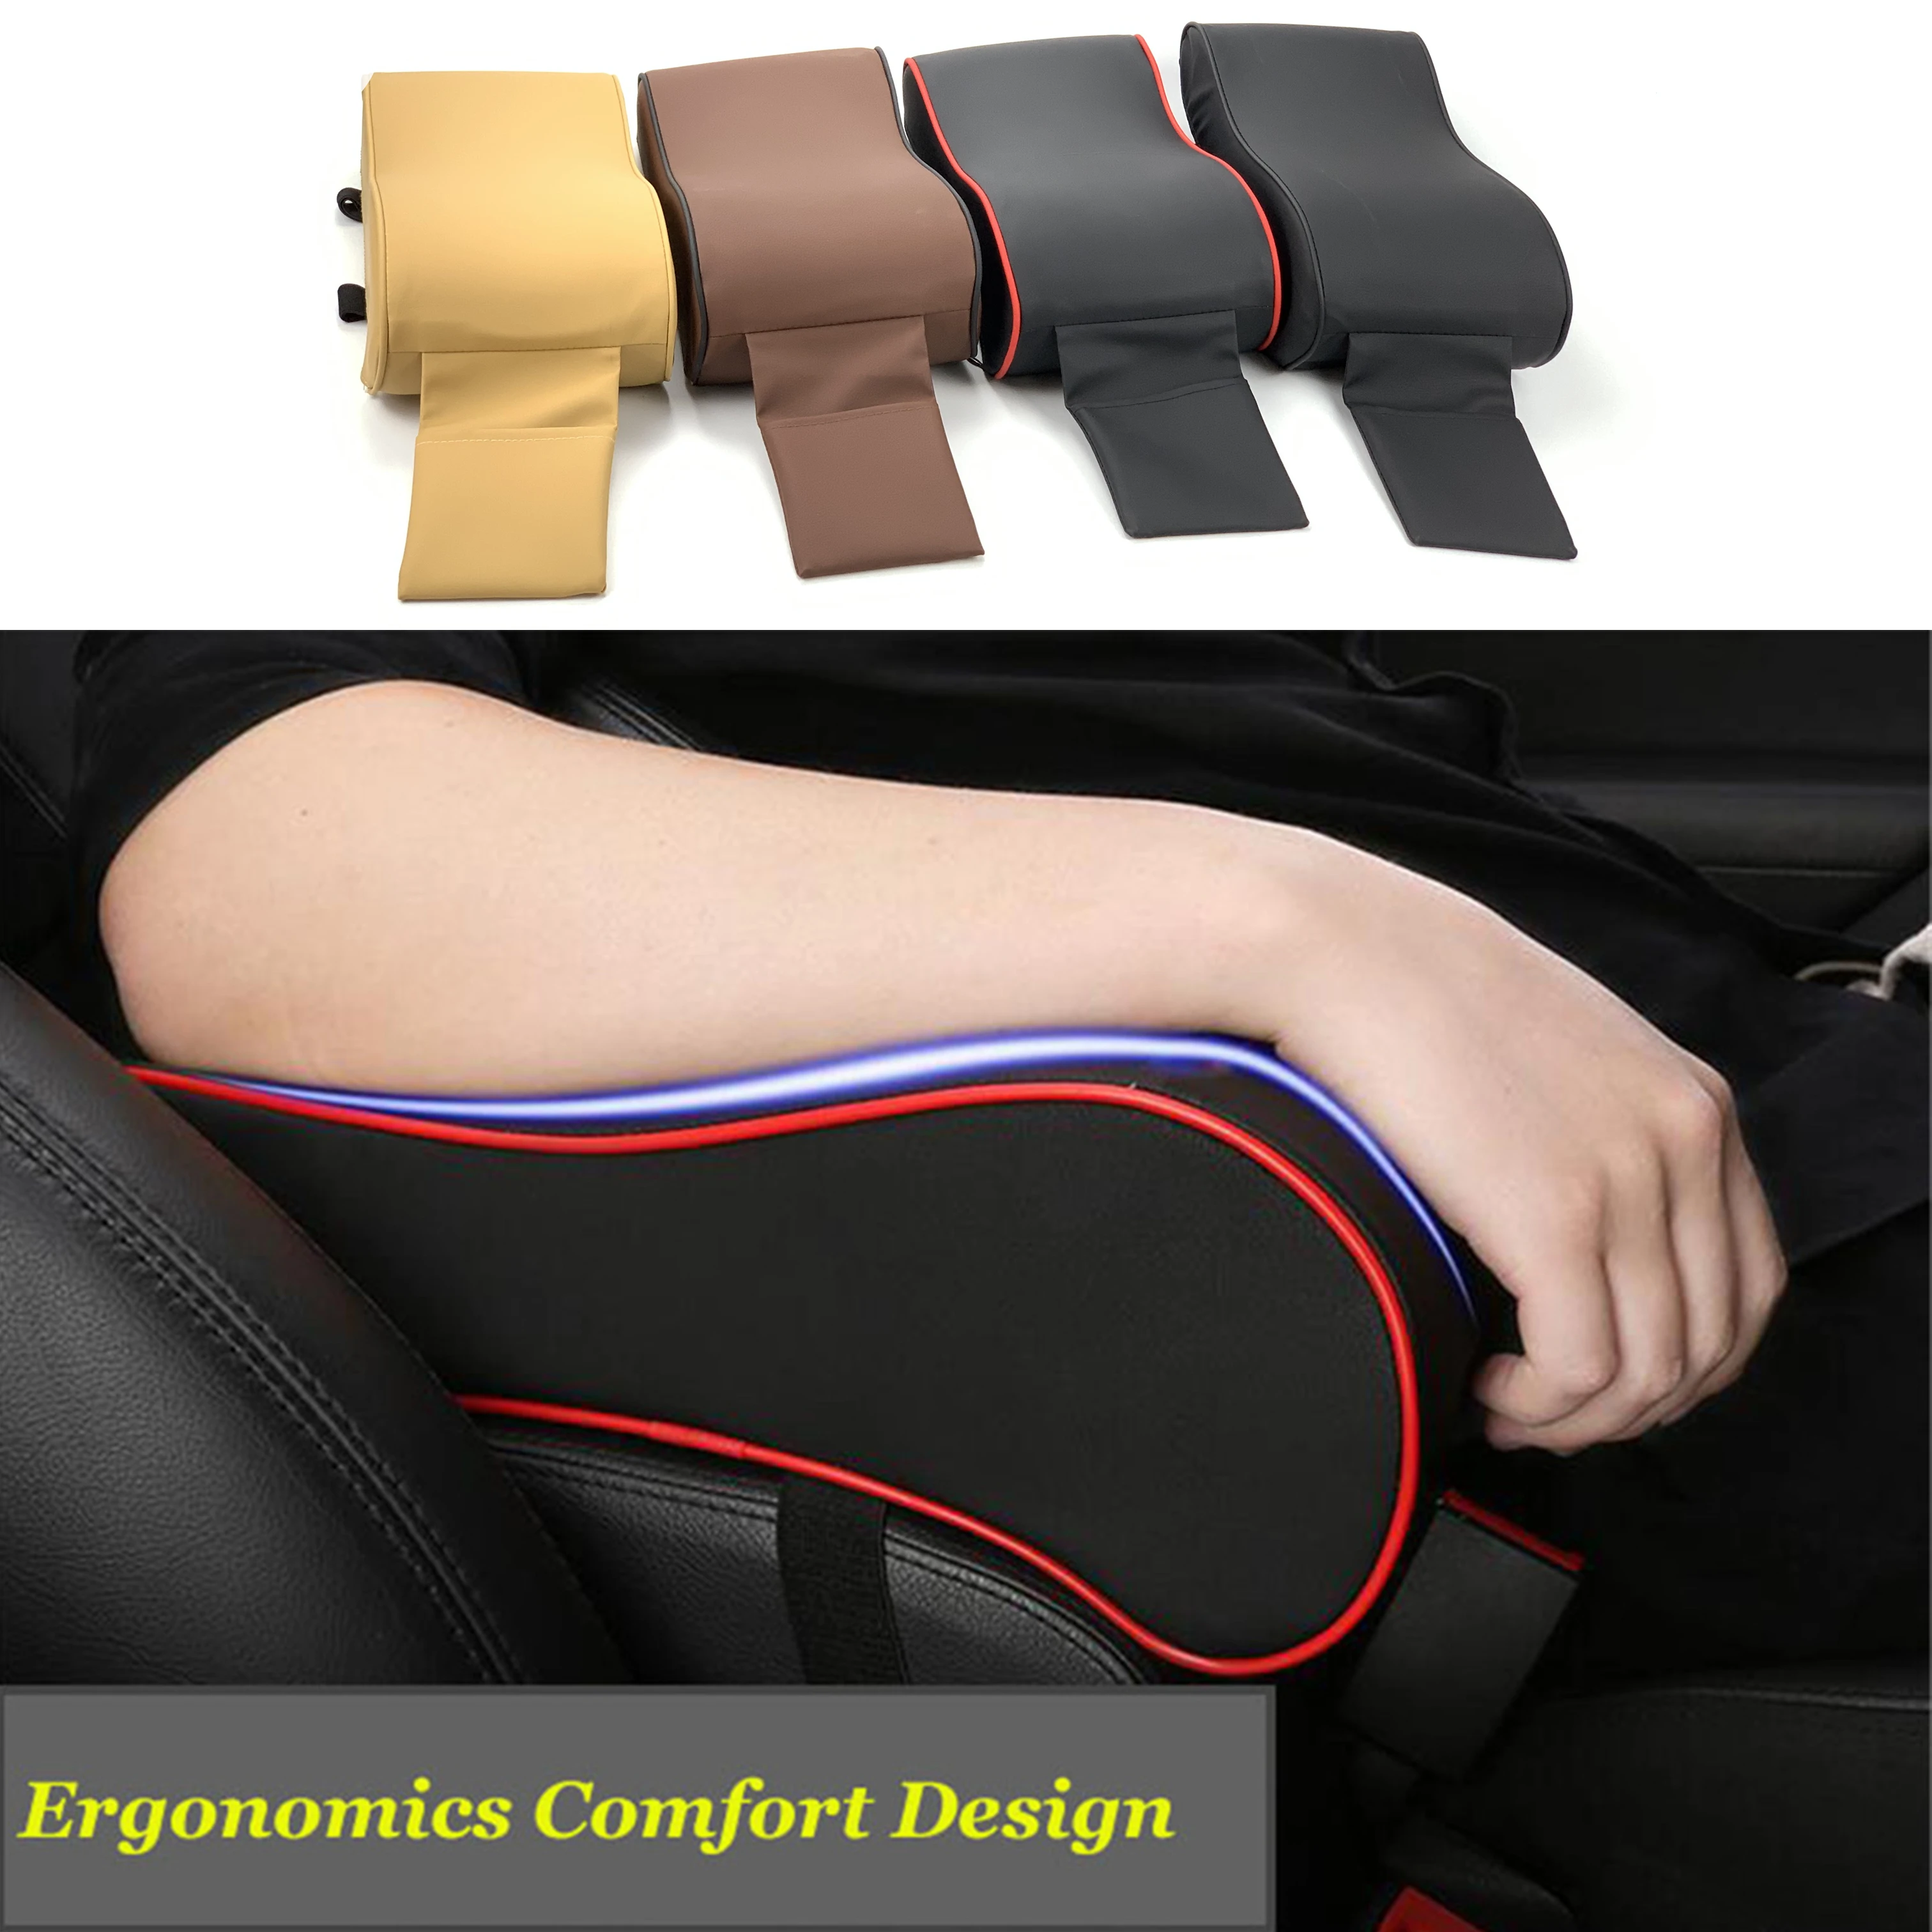 LMLY Car Center Console Pad for Nissan,Auto Armrest Seat Box Cover Protector Carbon Fiber Leather Design Decoration Car Armrest Cushion Compatible with Nissan All Series Auto 